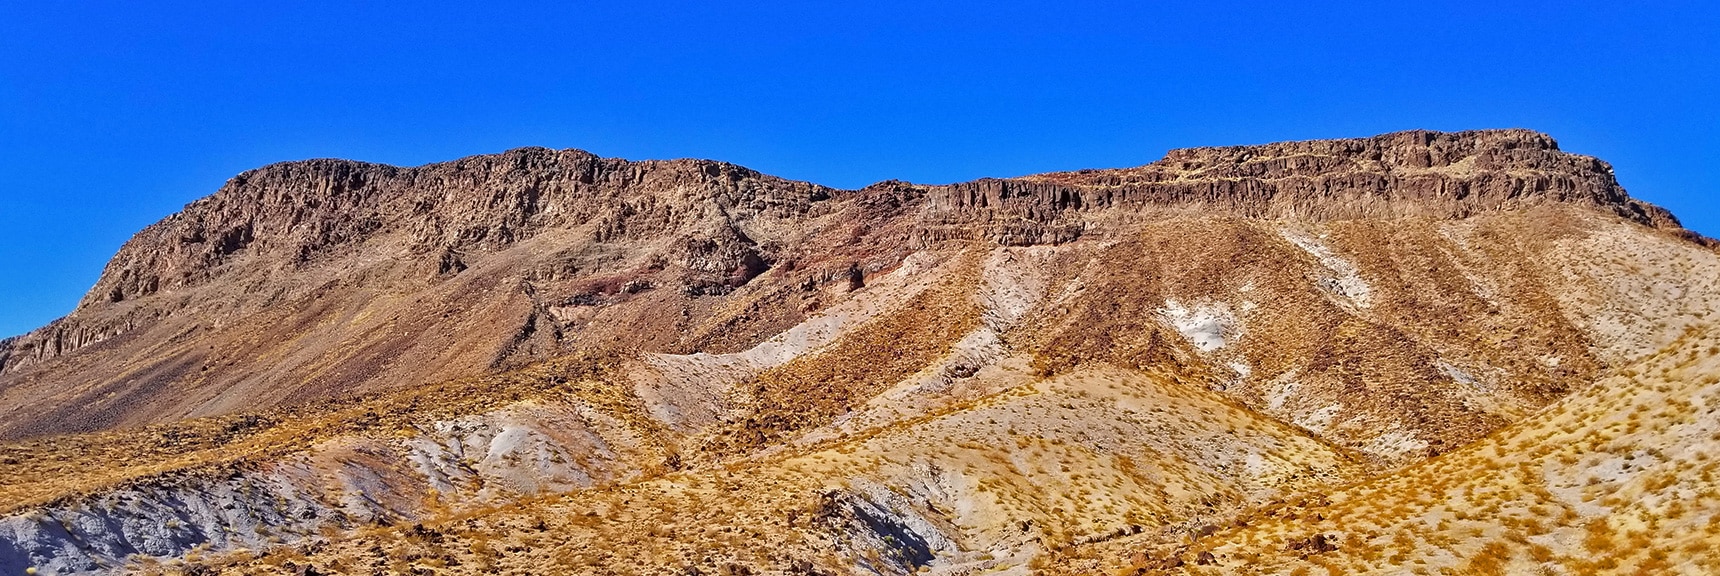 View of Fortification Hill While Ascending the Ridge | Fortification Hill | Lake Mead National Recreation Area, Arizona